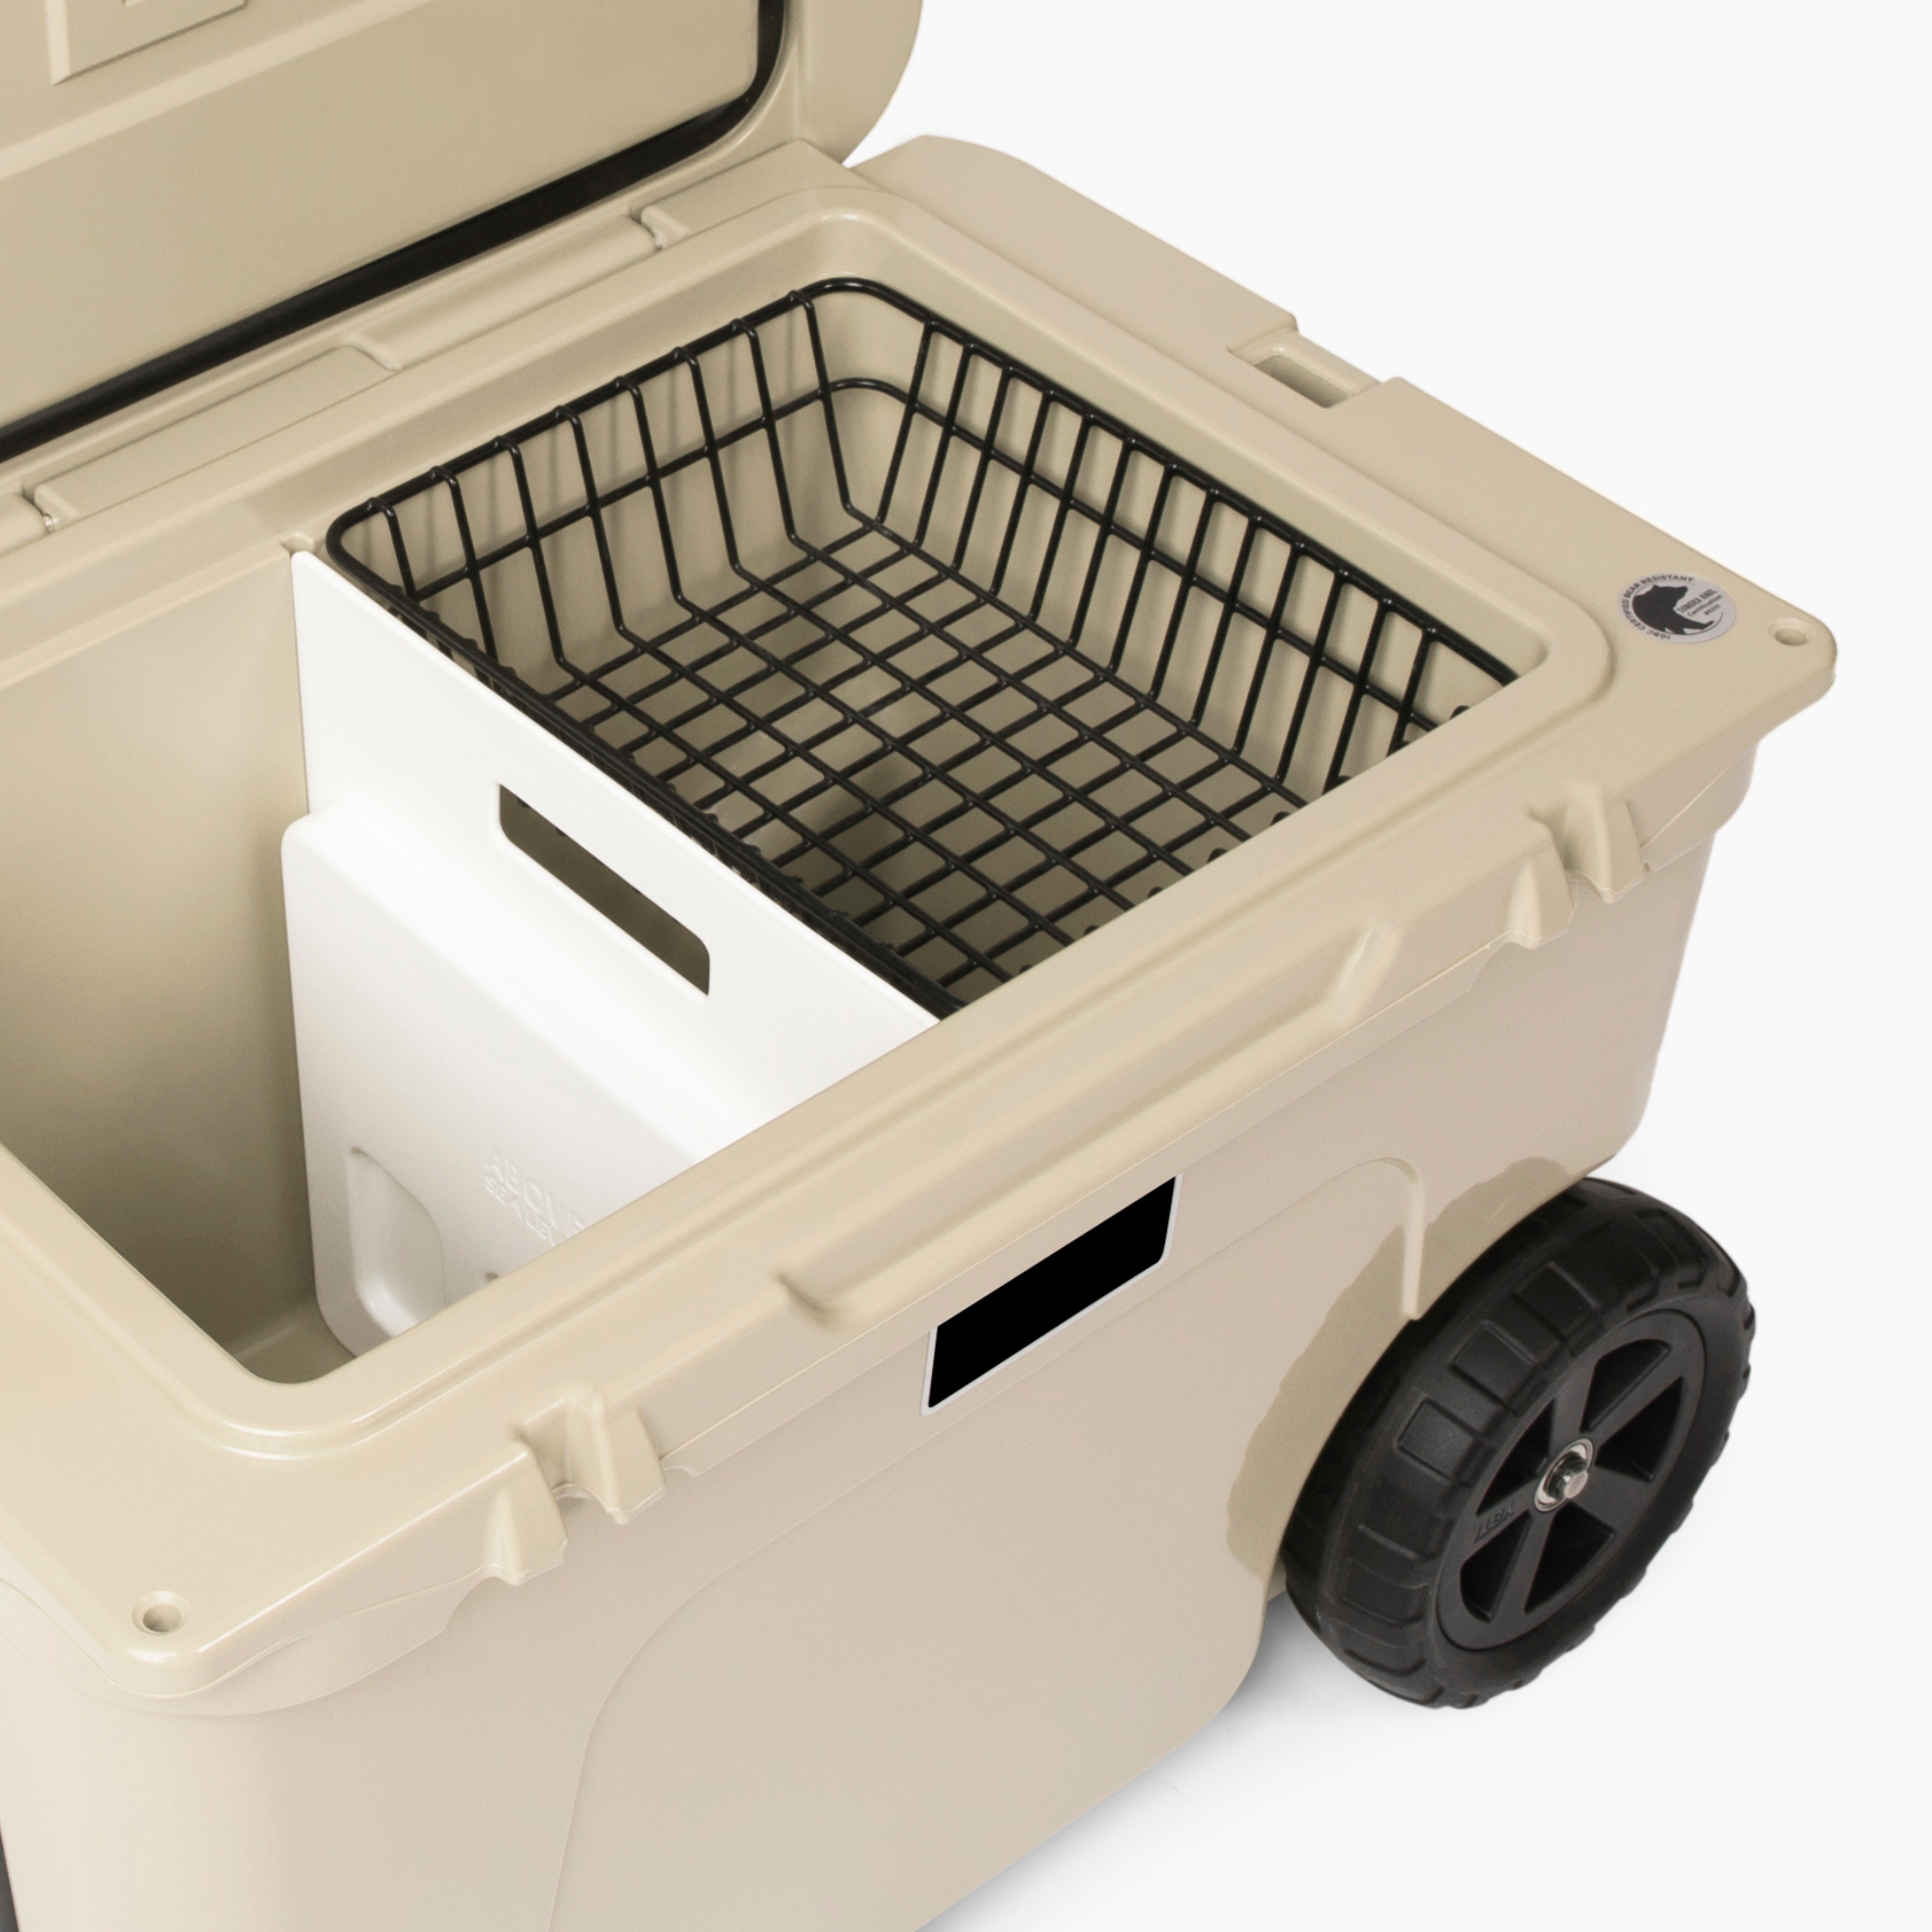 The Best Accessories for the YETI Tundra Haul Portable Wheeled Cooler –  Above Sea Level Cooler Accessories